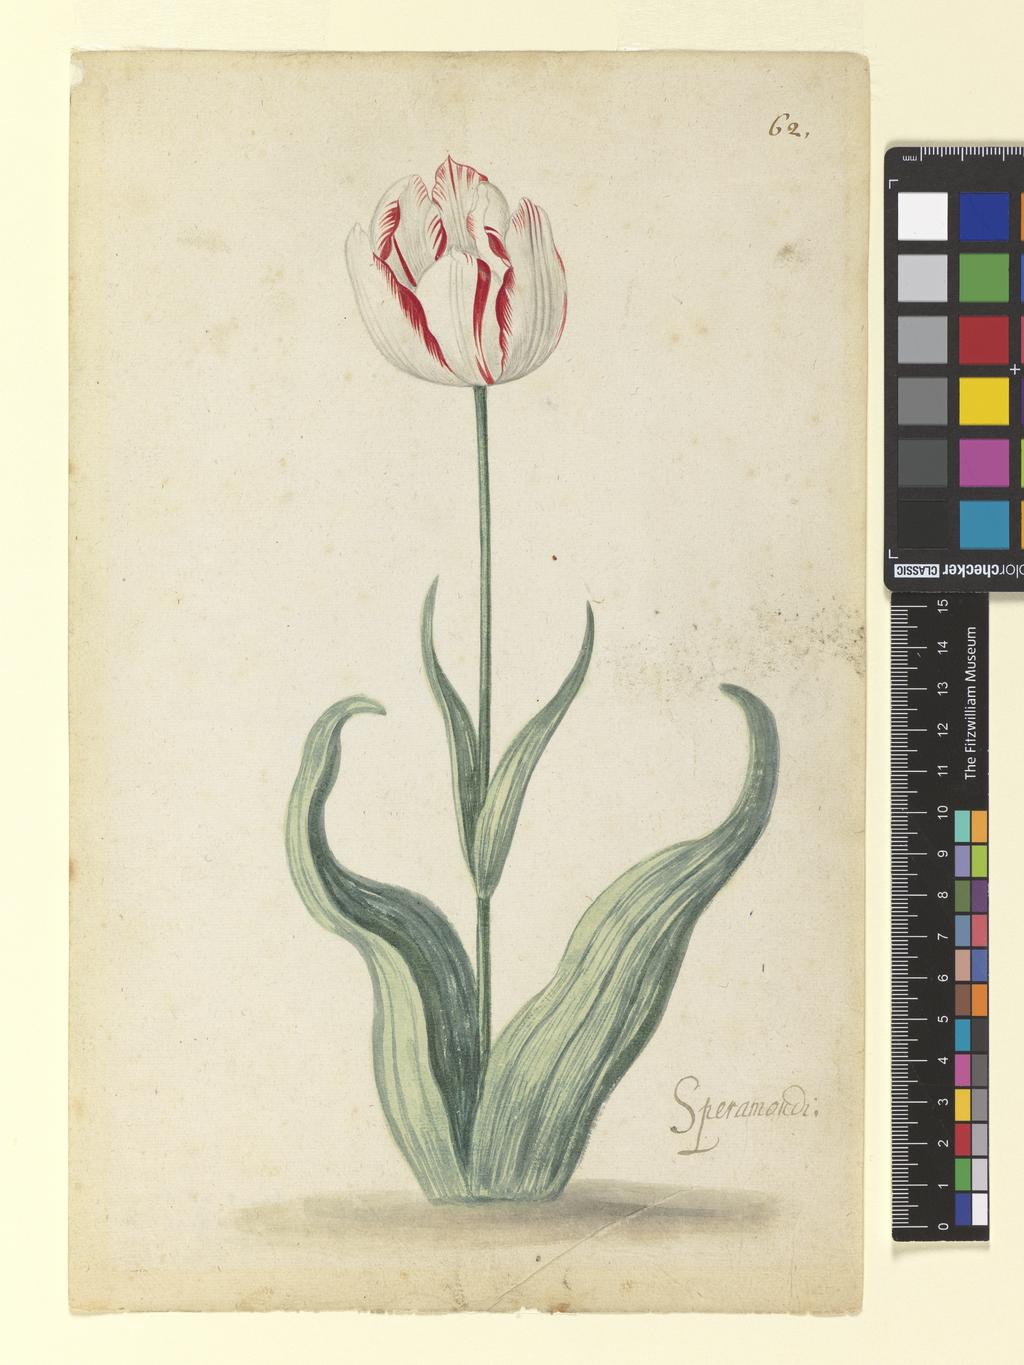 An image of Tulip. Bosschaert, Ambrosius, the younger, attributed to (Dutch, 1609-1645). Watercolour on paper, c. 1640.